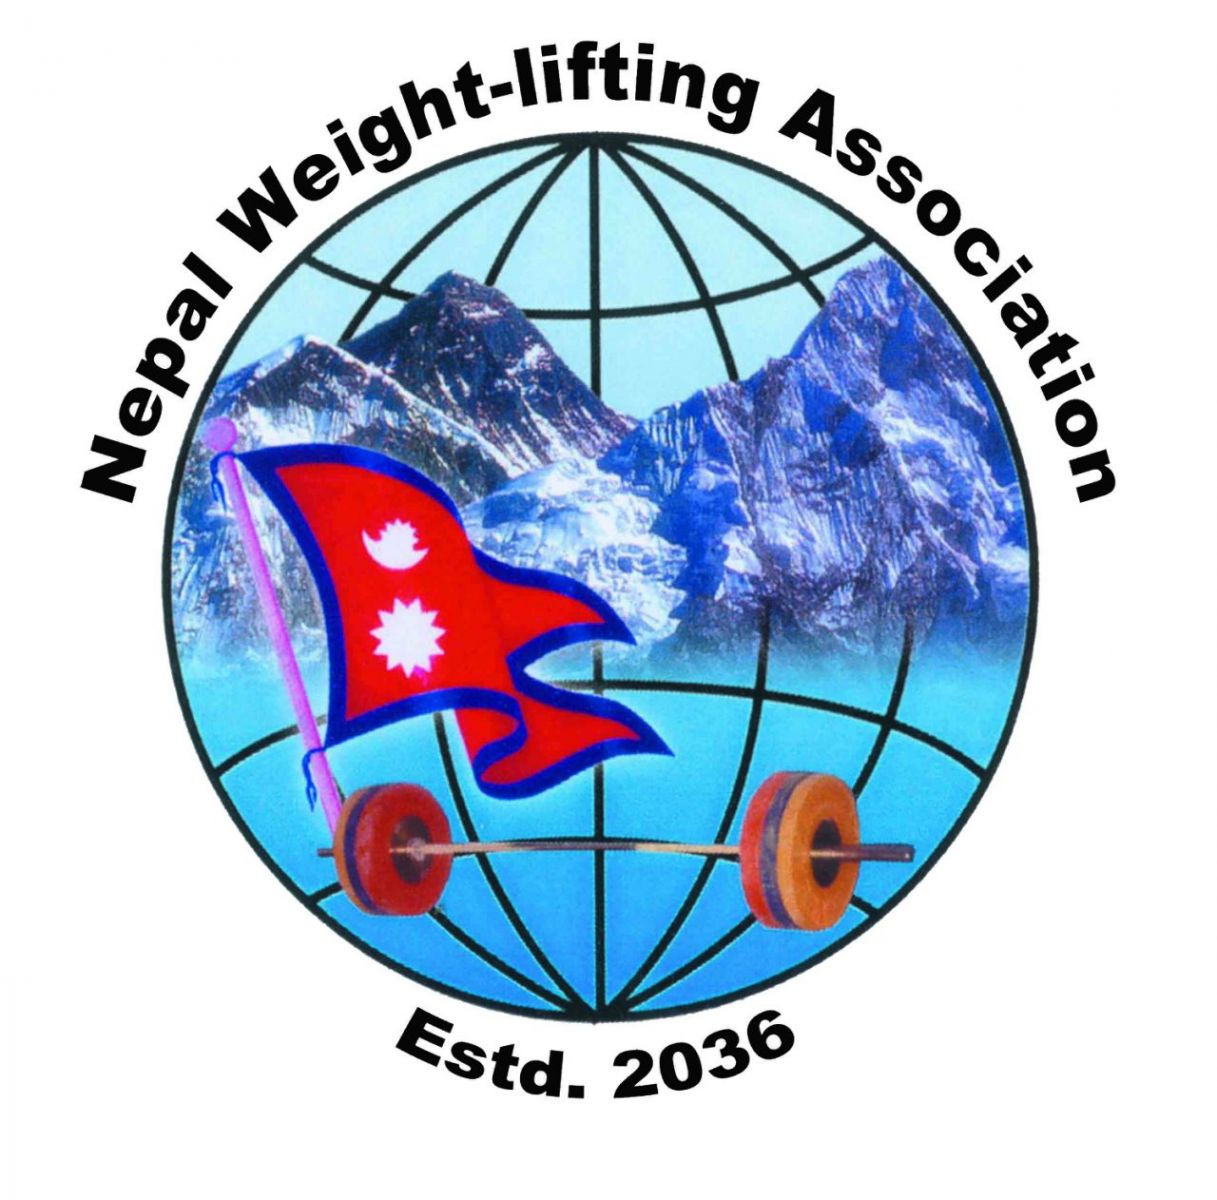 Weightlifting National Records